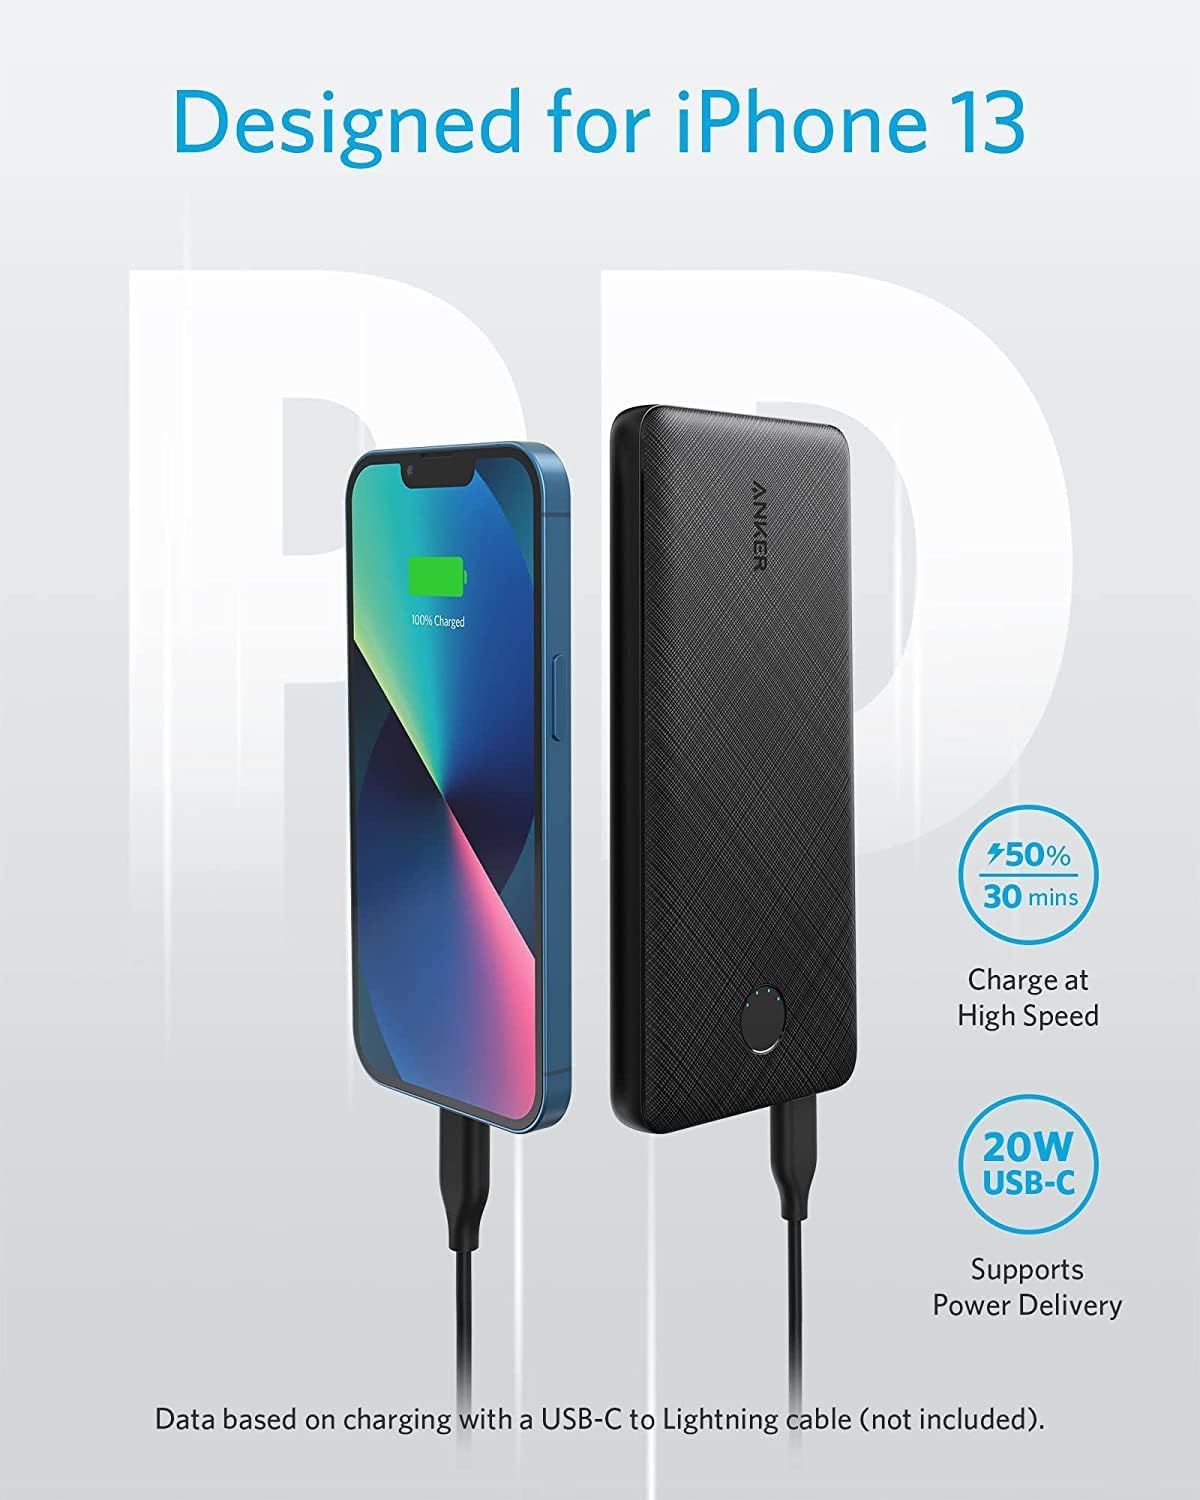 Anker USB-C Portable Charger 10000mAh with 20W Power Delivery, 523 Power Bank